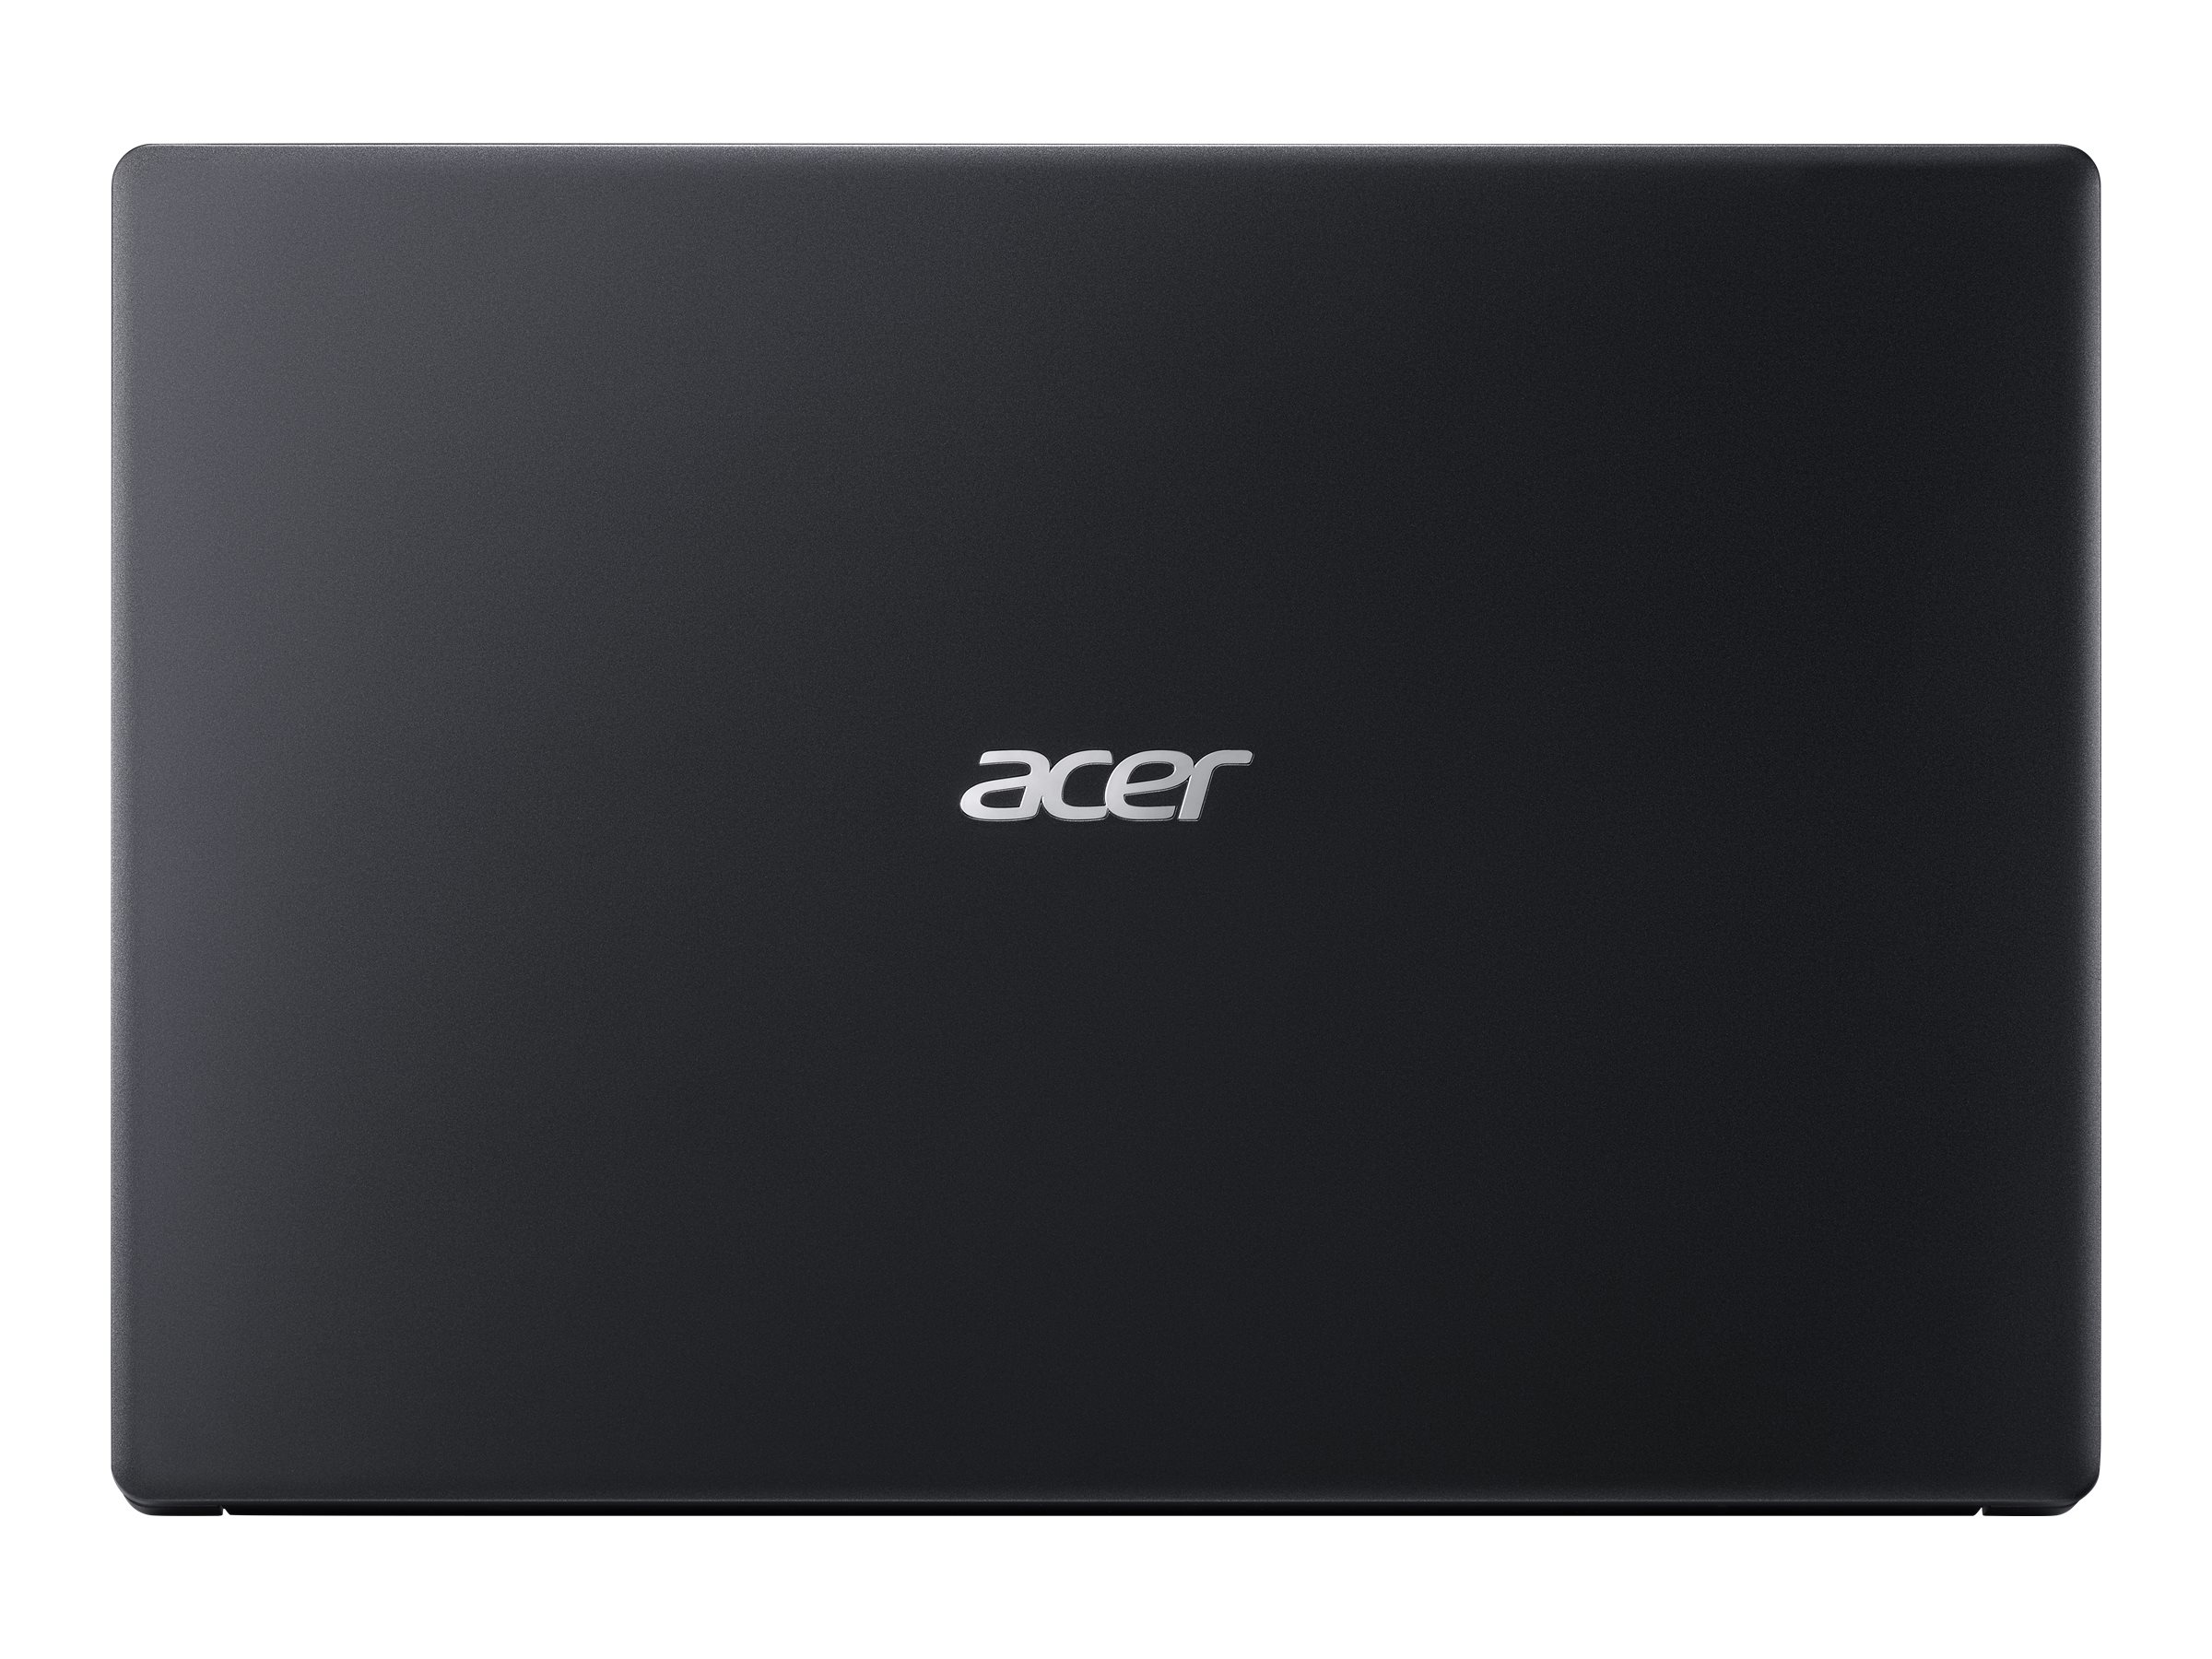 Acer Aspire 1 A115-31-C2Y3 15.6" FHD Laptop, Intel Celeron, 4GB RAM, 64GB SSD, Windows 10 Home in S mode, Charcoal Black, NX.HE4AA.003 - image 2 of 8